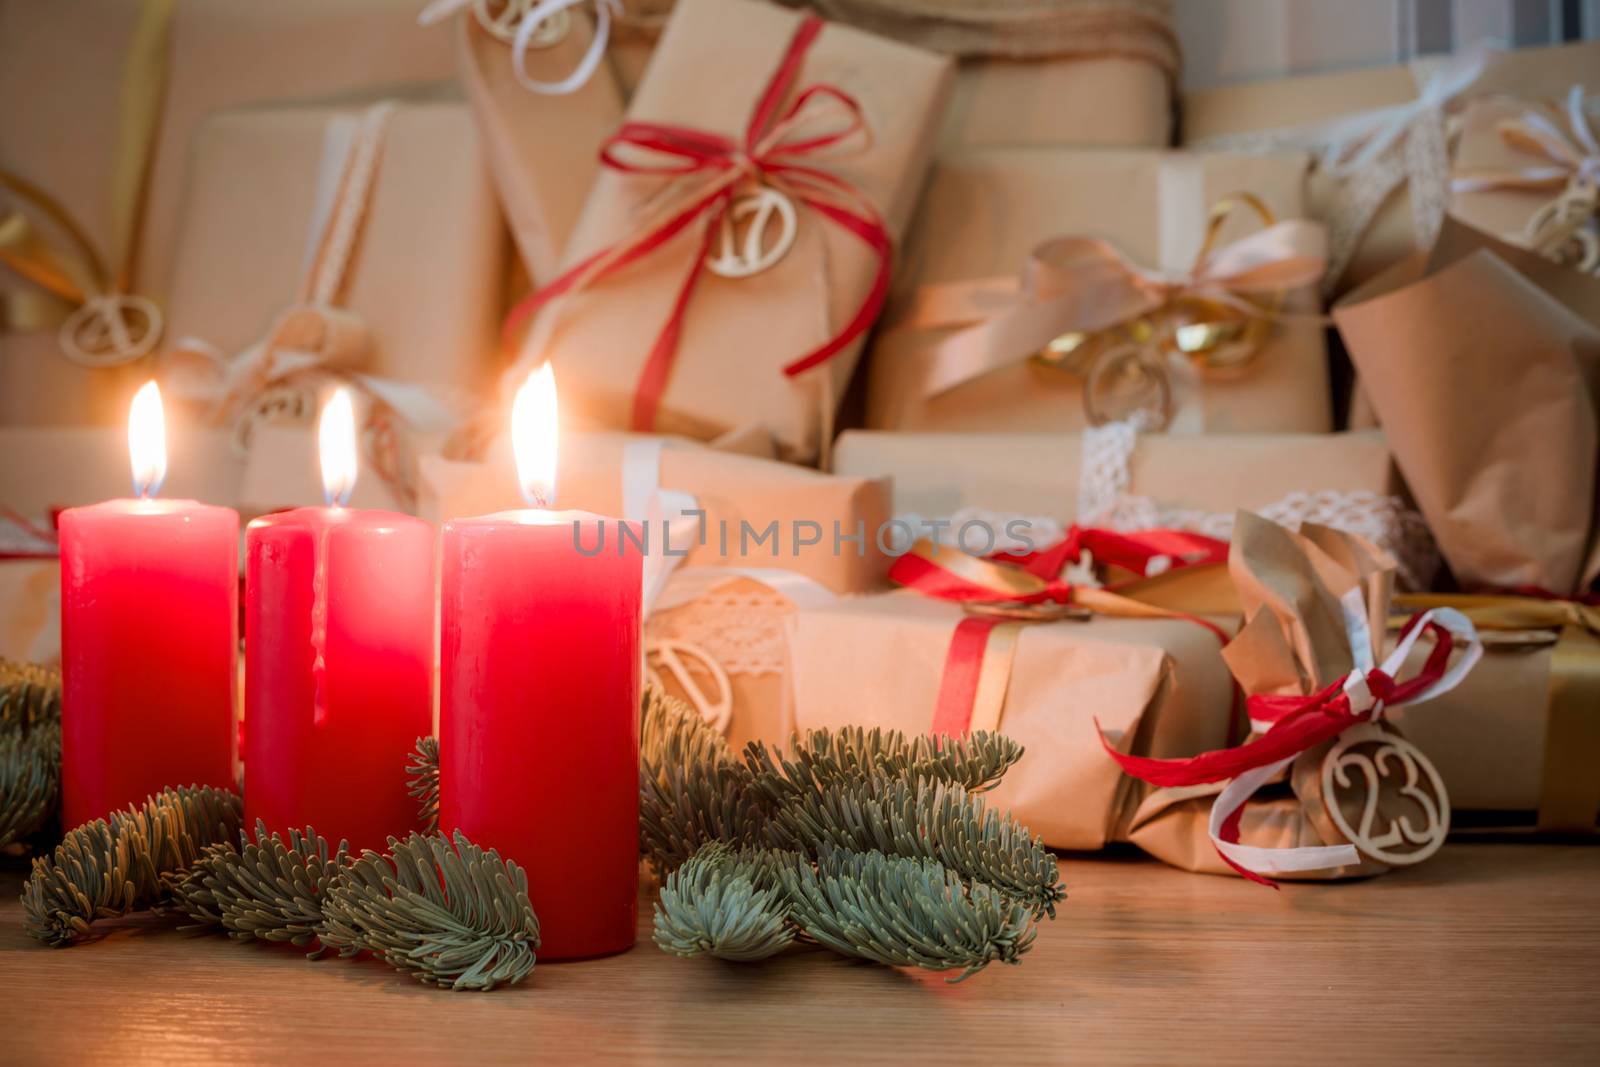 Heap of decorated advent gift boxes in craft paper with red and white decor in a heap on the room floor three red burning candles and fir tree branch